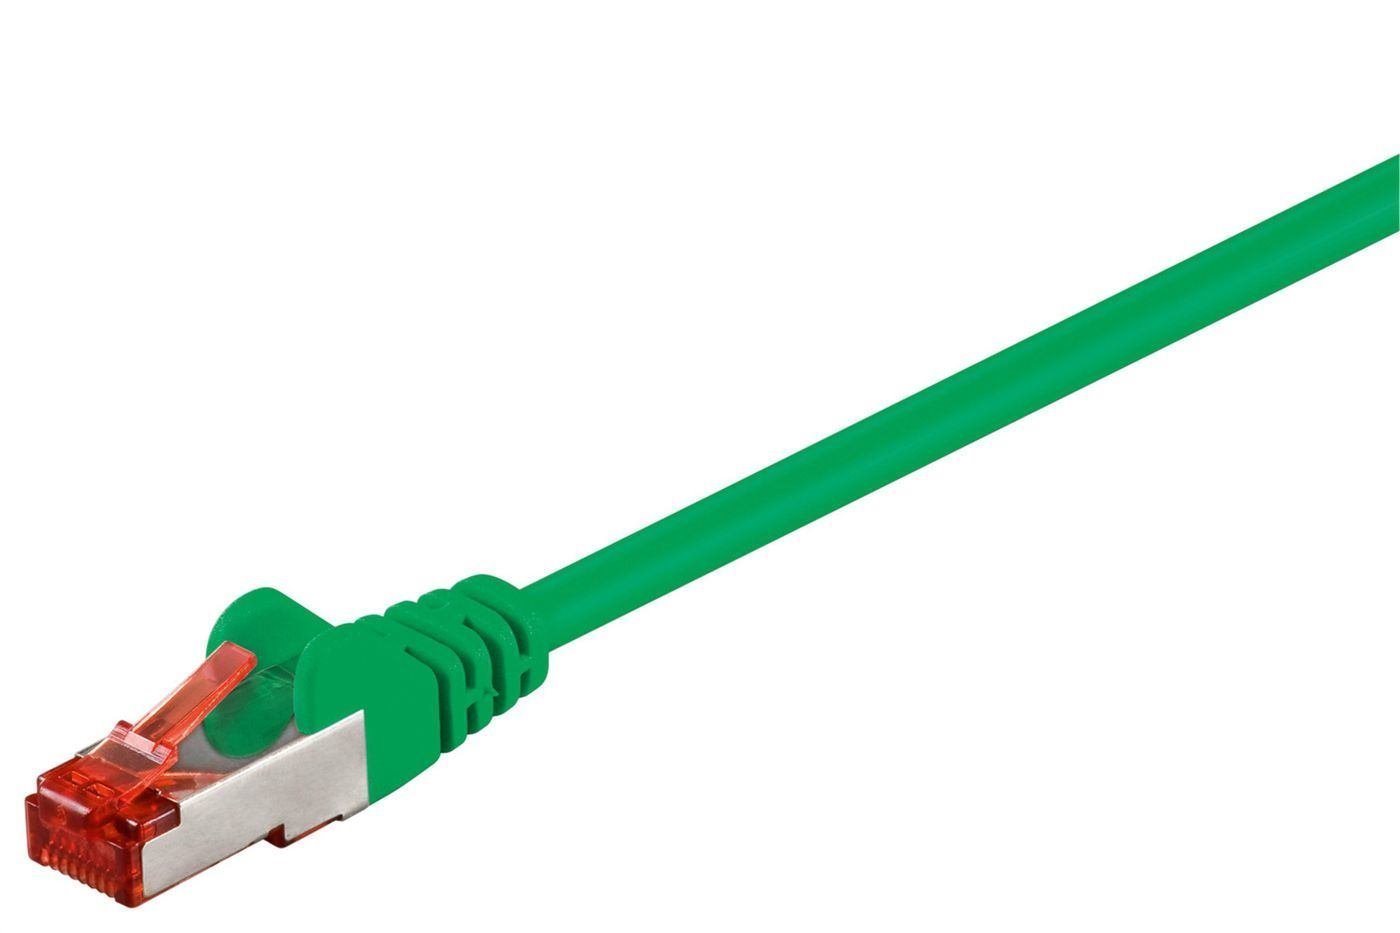 Microconnect SSTP Cat6 1M Networking Cable Green S/FTP [S-STP] (S/FTP Cat6 1M Green LSZH - PiMF [Pairs In Metal Foil] - 4x2xAWG 28 Cu - Warranty: 300M)